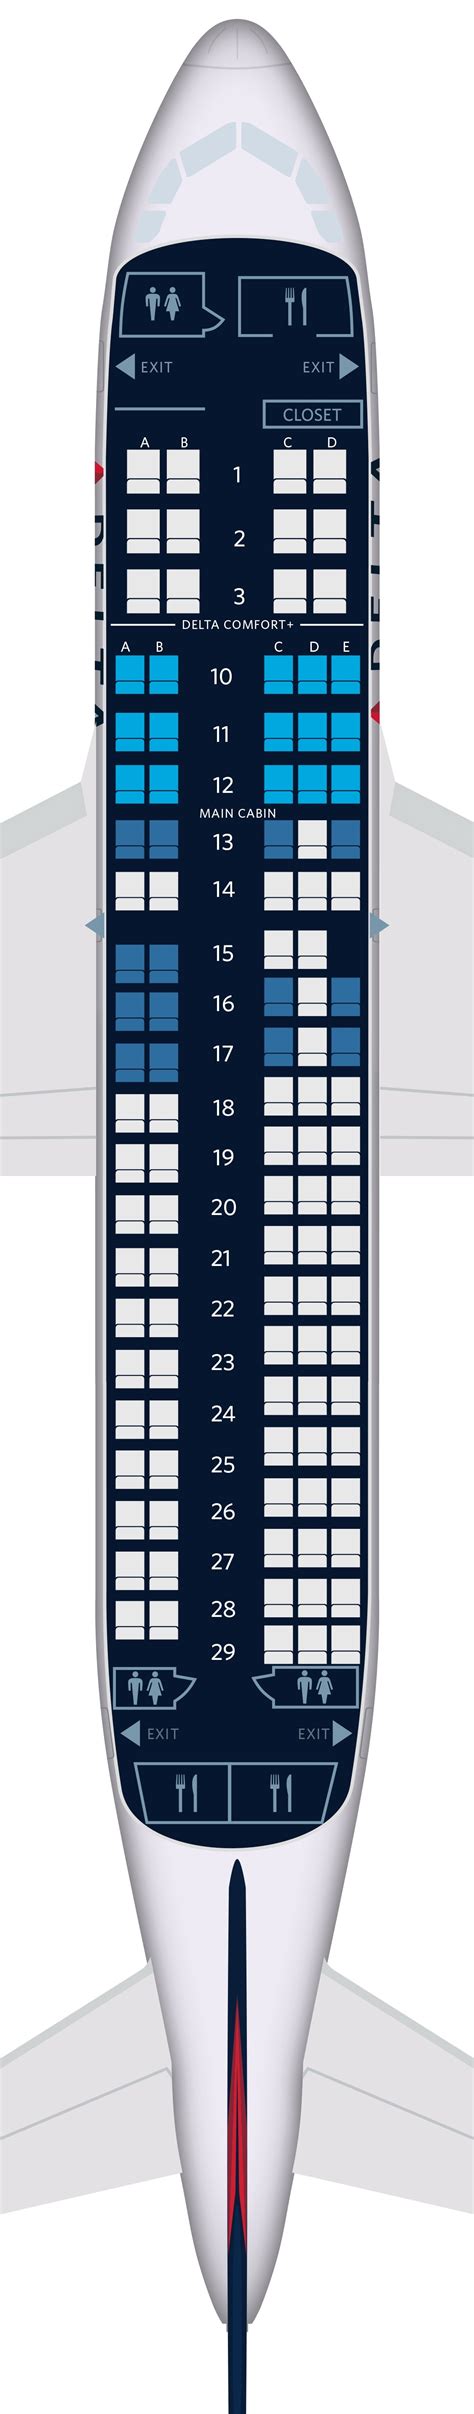 Airbus A Seat Map Egyptair